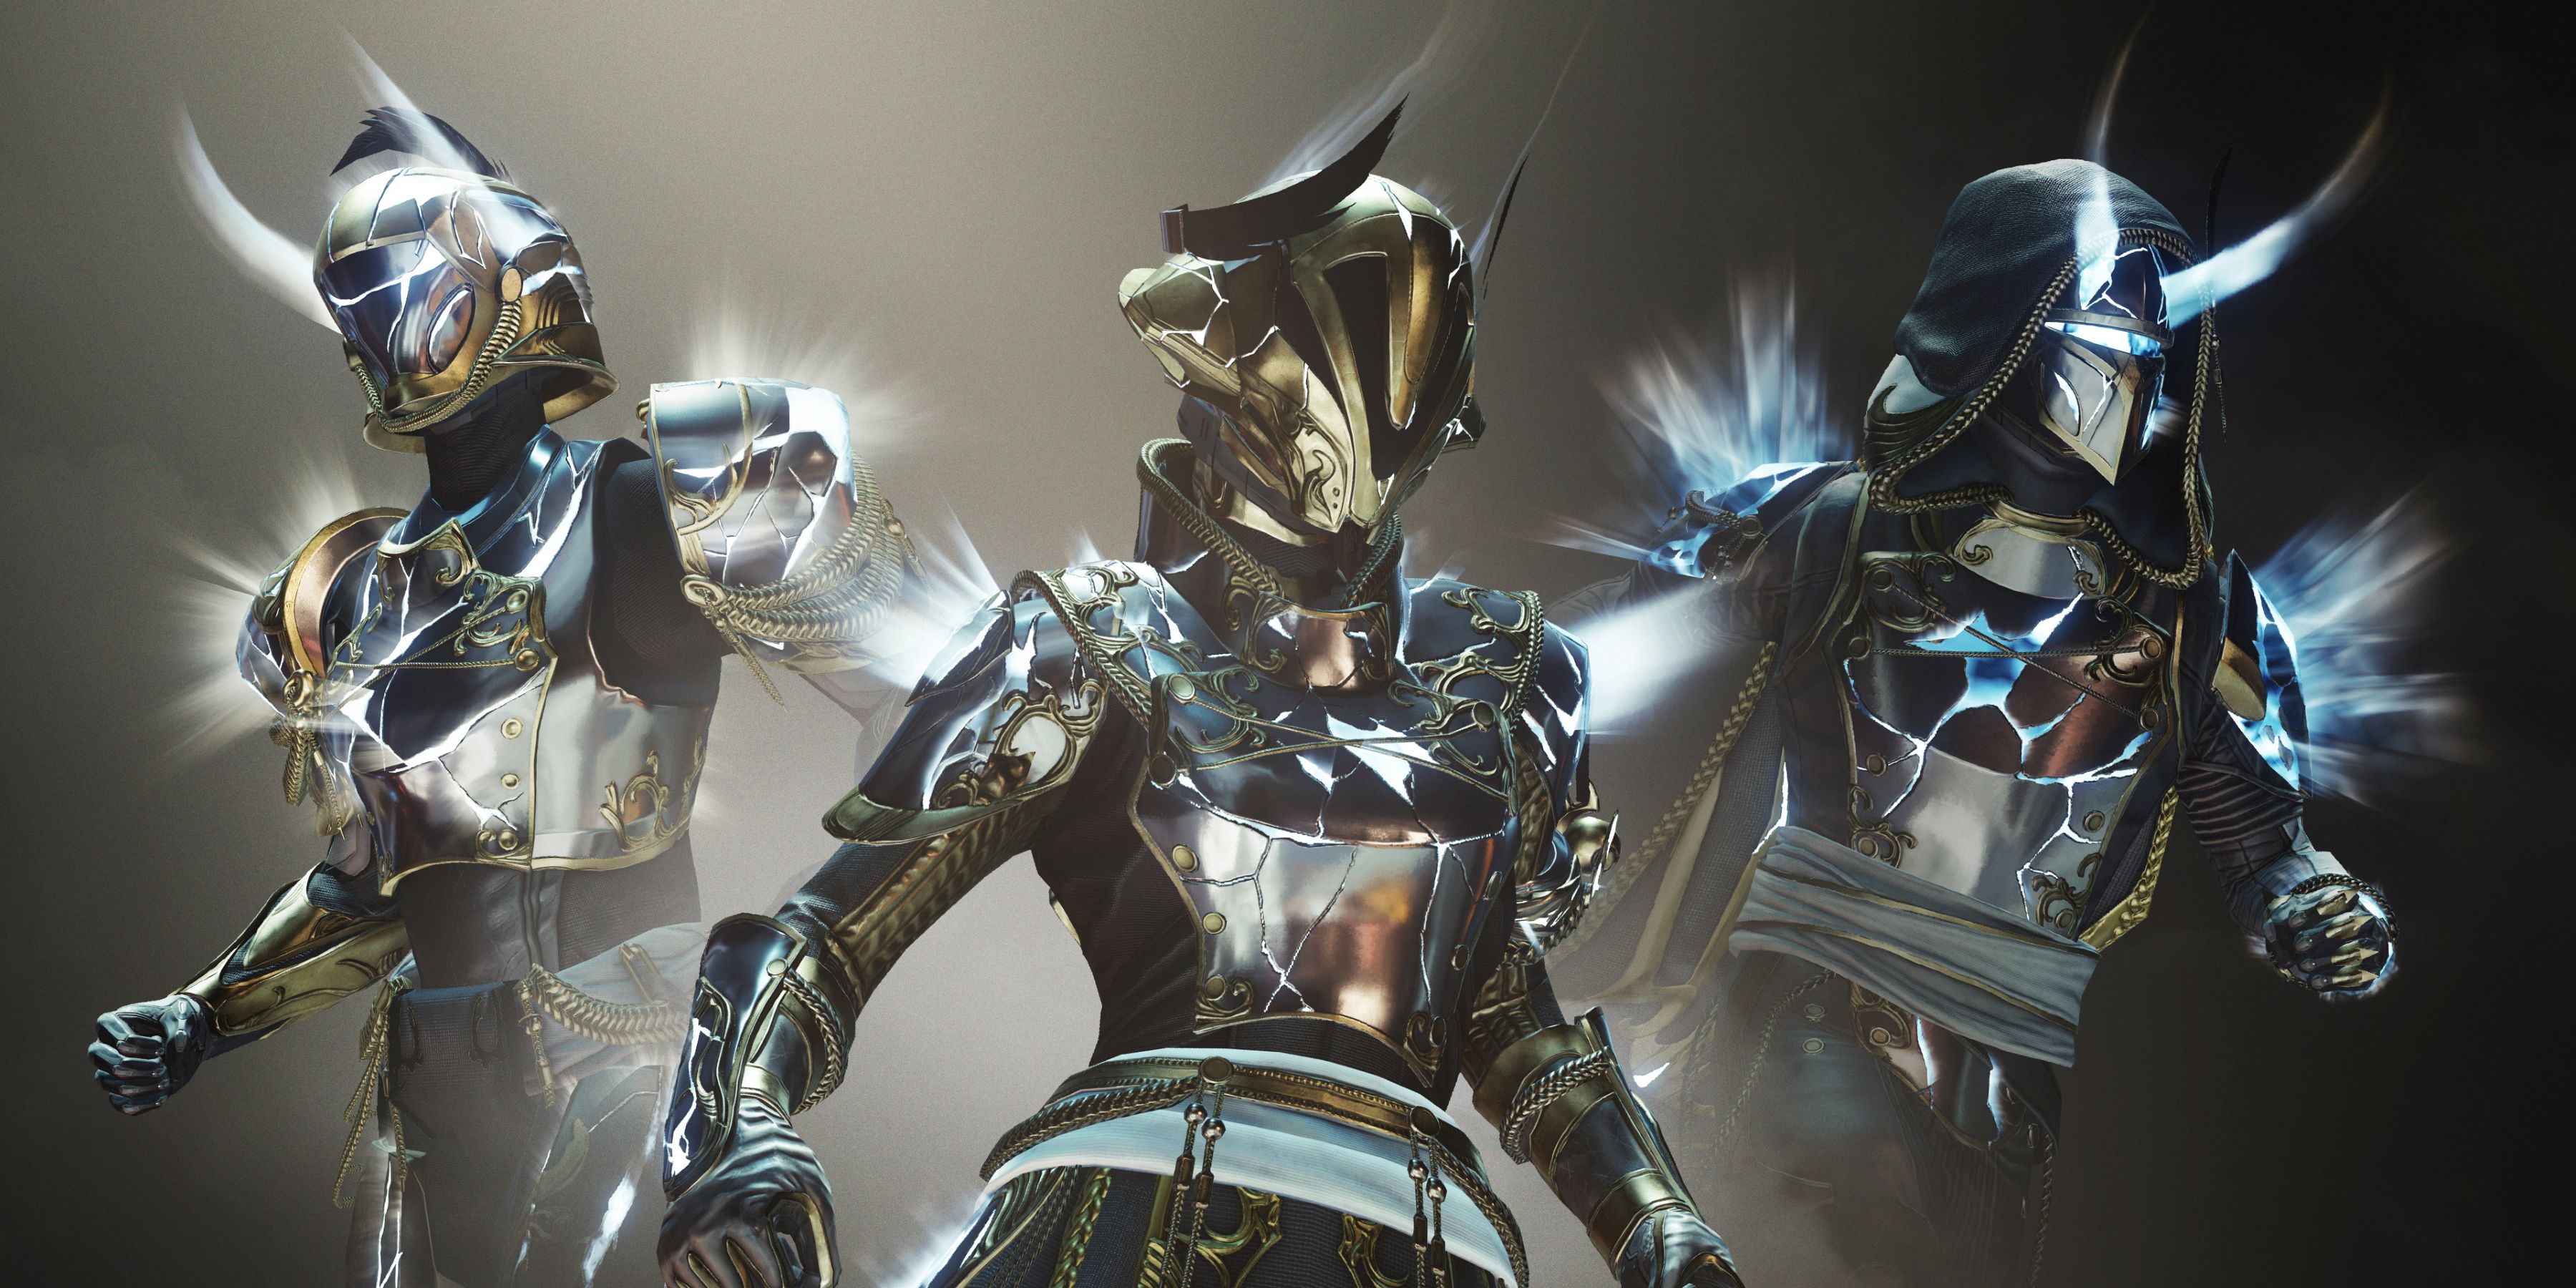 Guardians Standing Together With New Glowing Solstice Armor